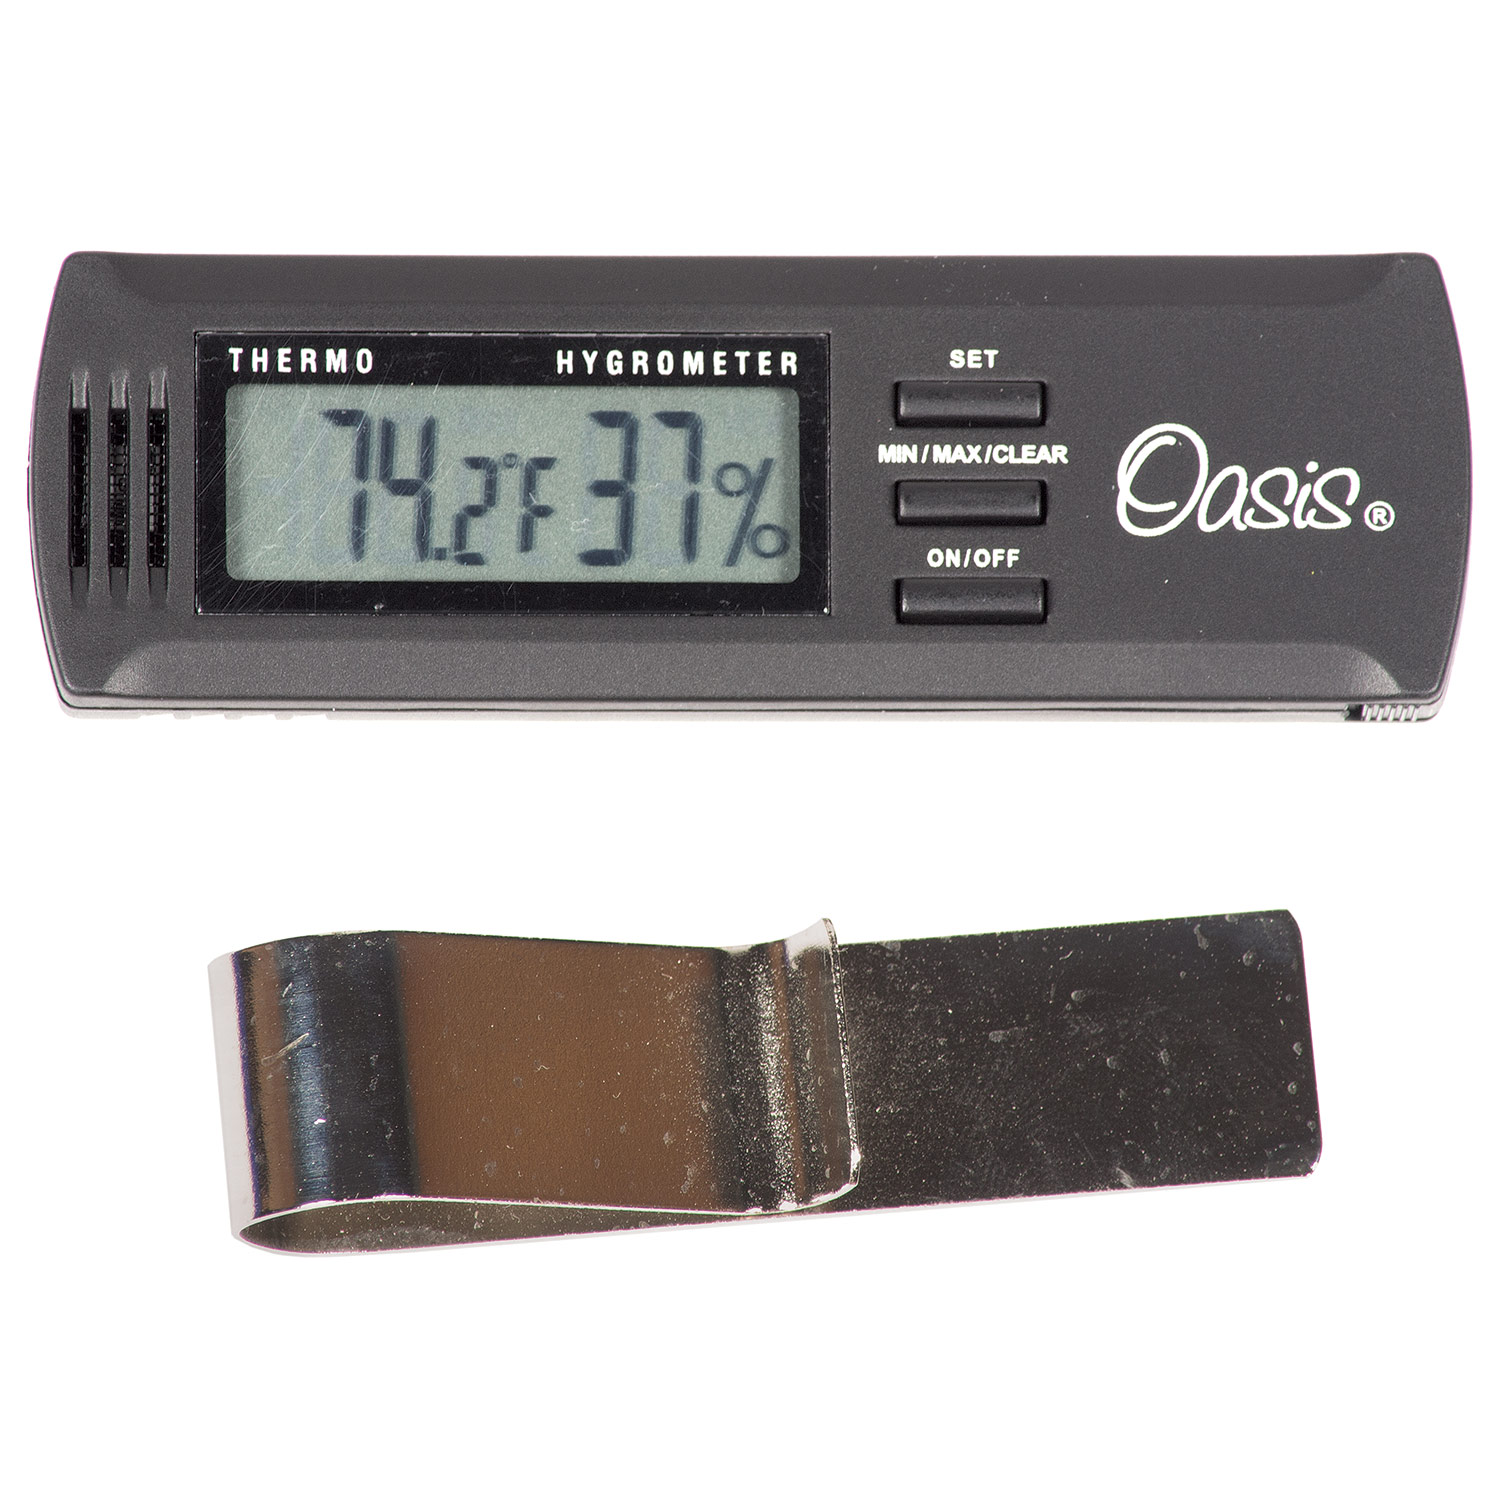 ADSX - Mini higrometer and thermometer for reeds/instrument (Circle)